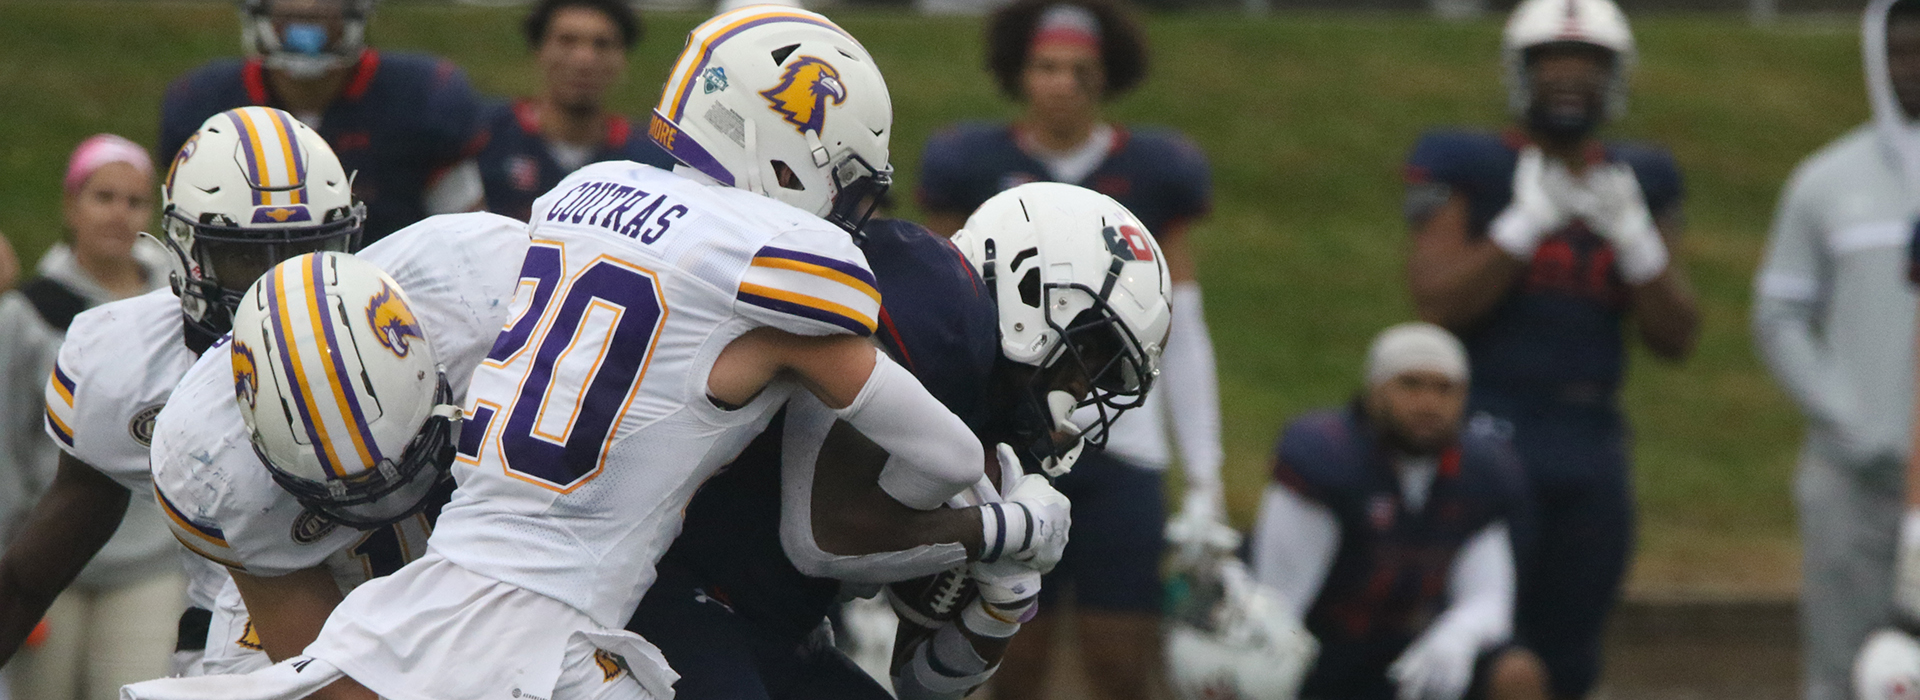 Coutras leads seven selections on PhilSteele.com All-Big South/OVC team